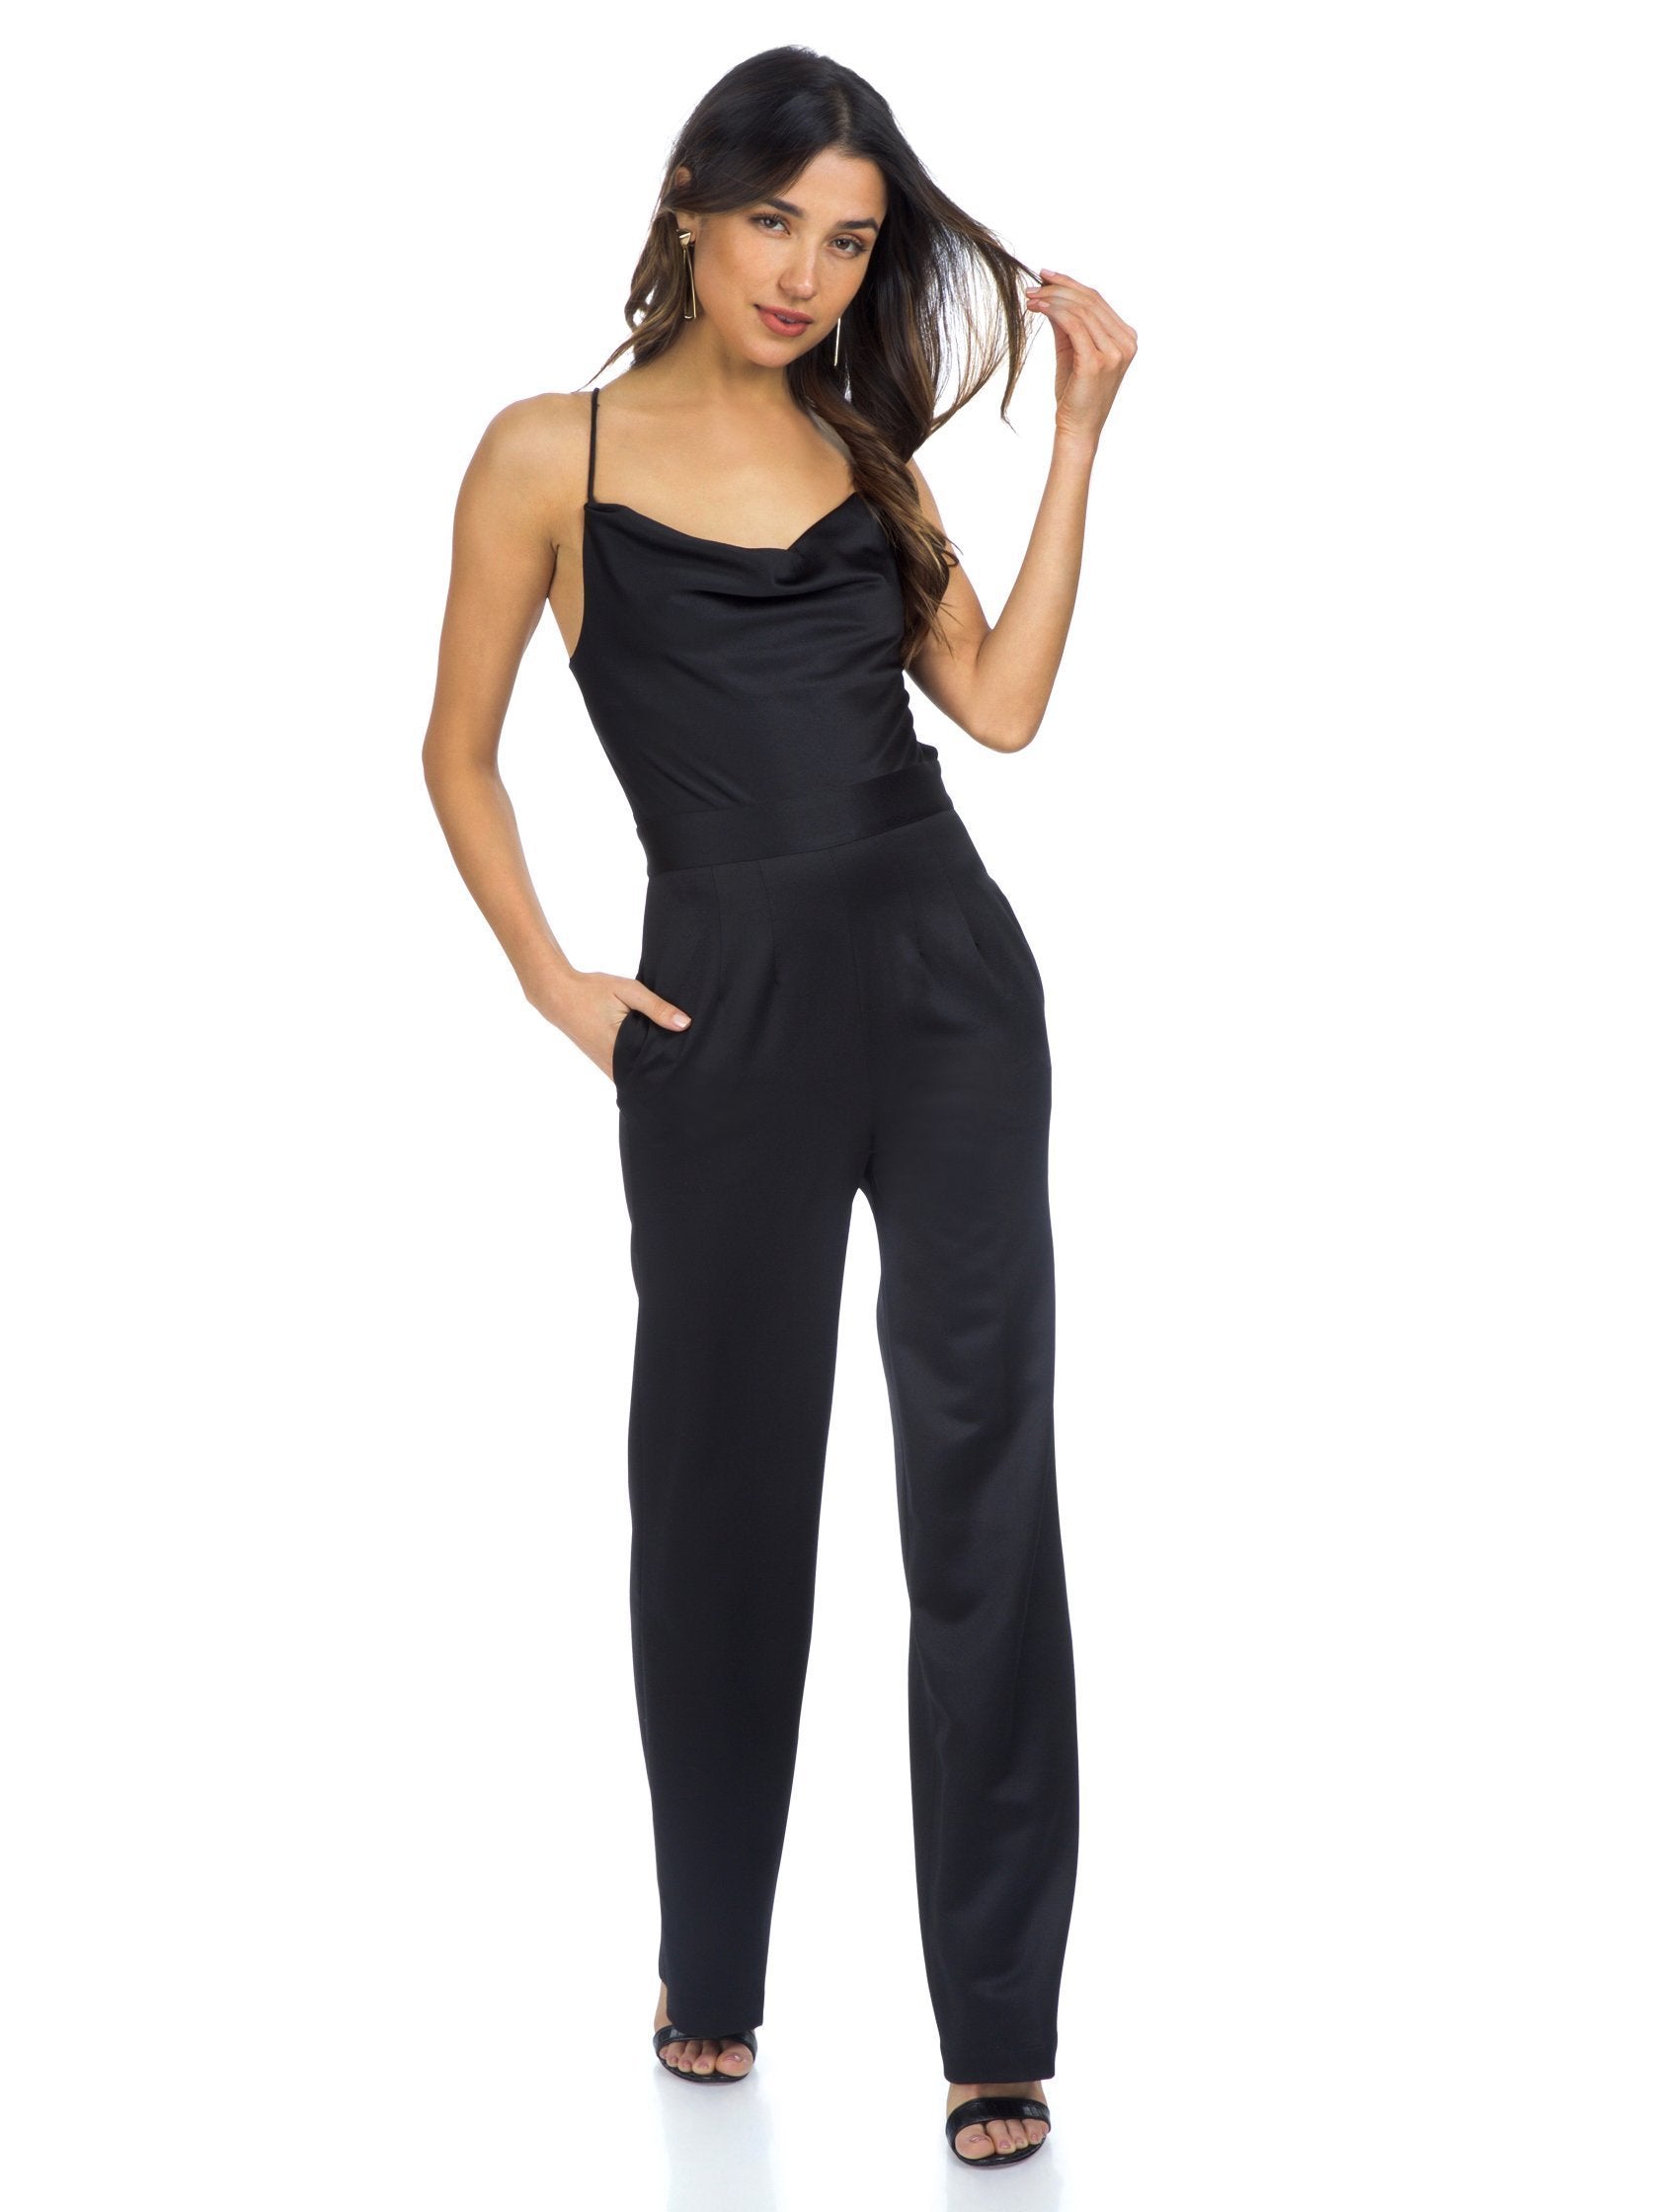 Girl outfit in a jumpsuit rental from NBD called Diem Jumpsuit